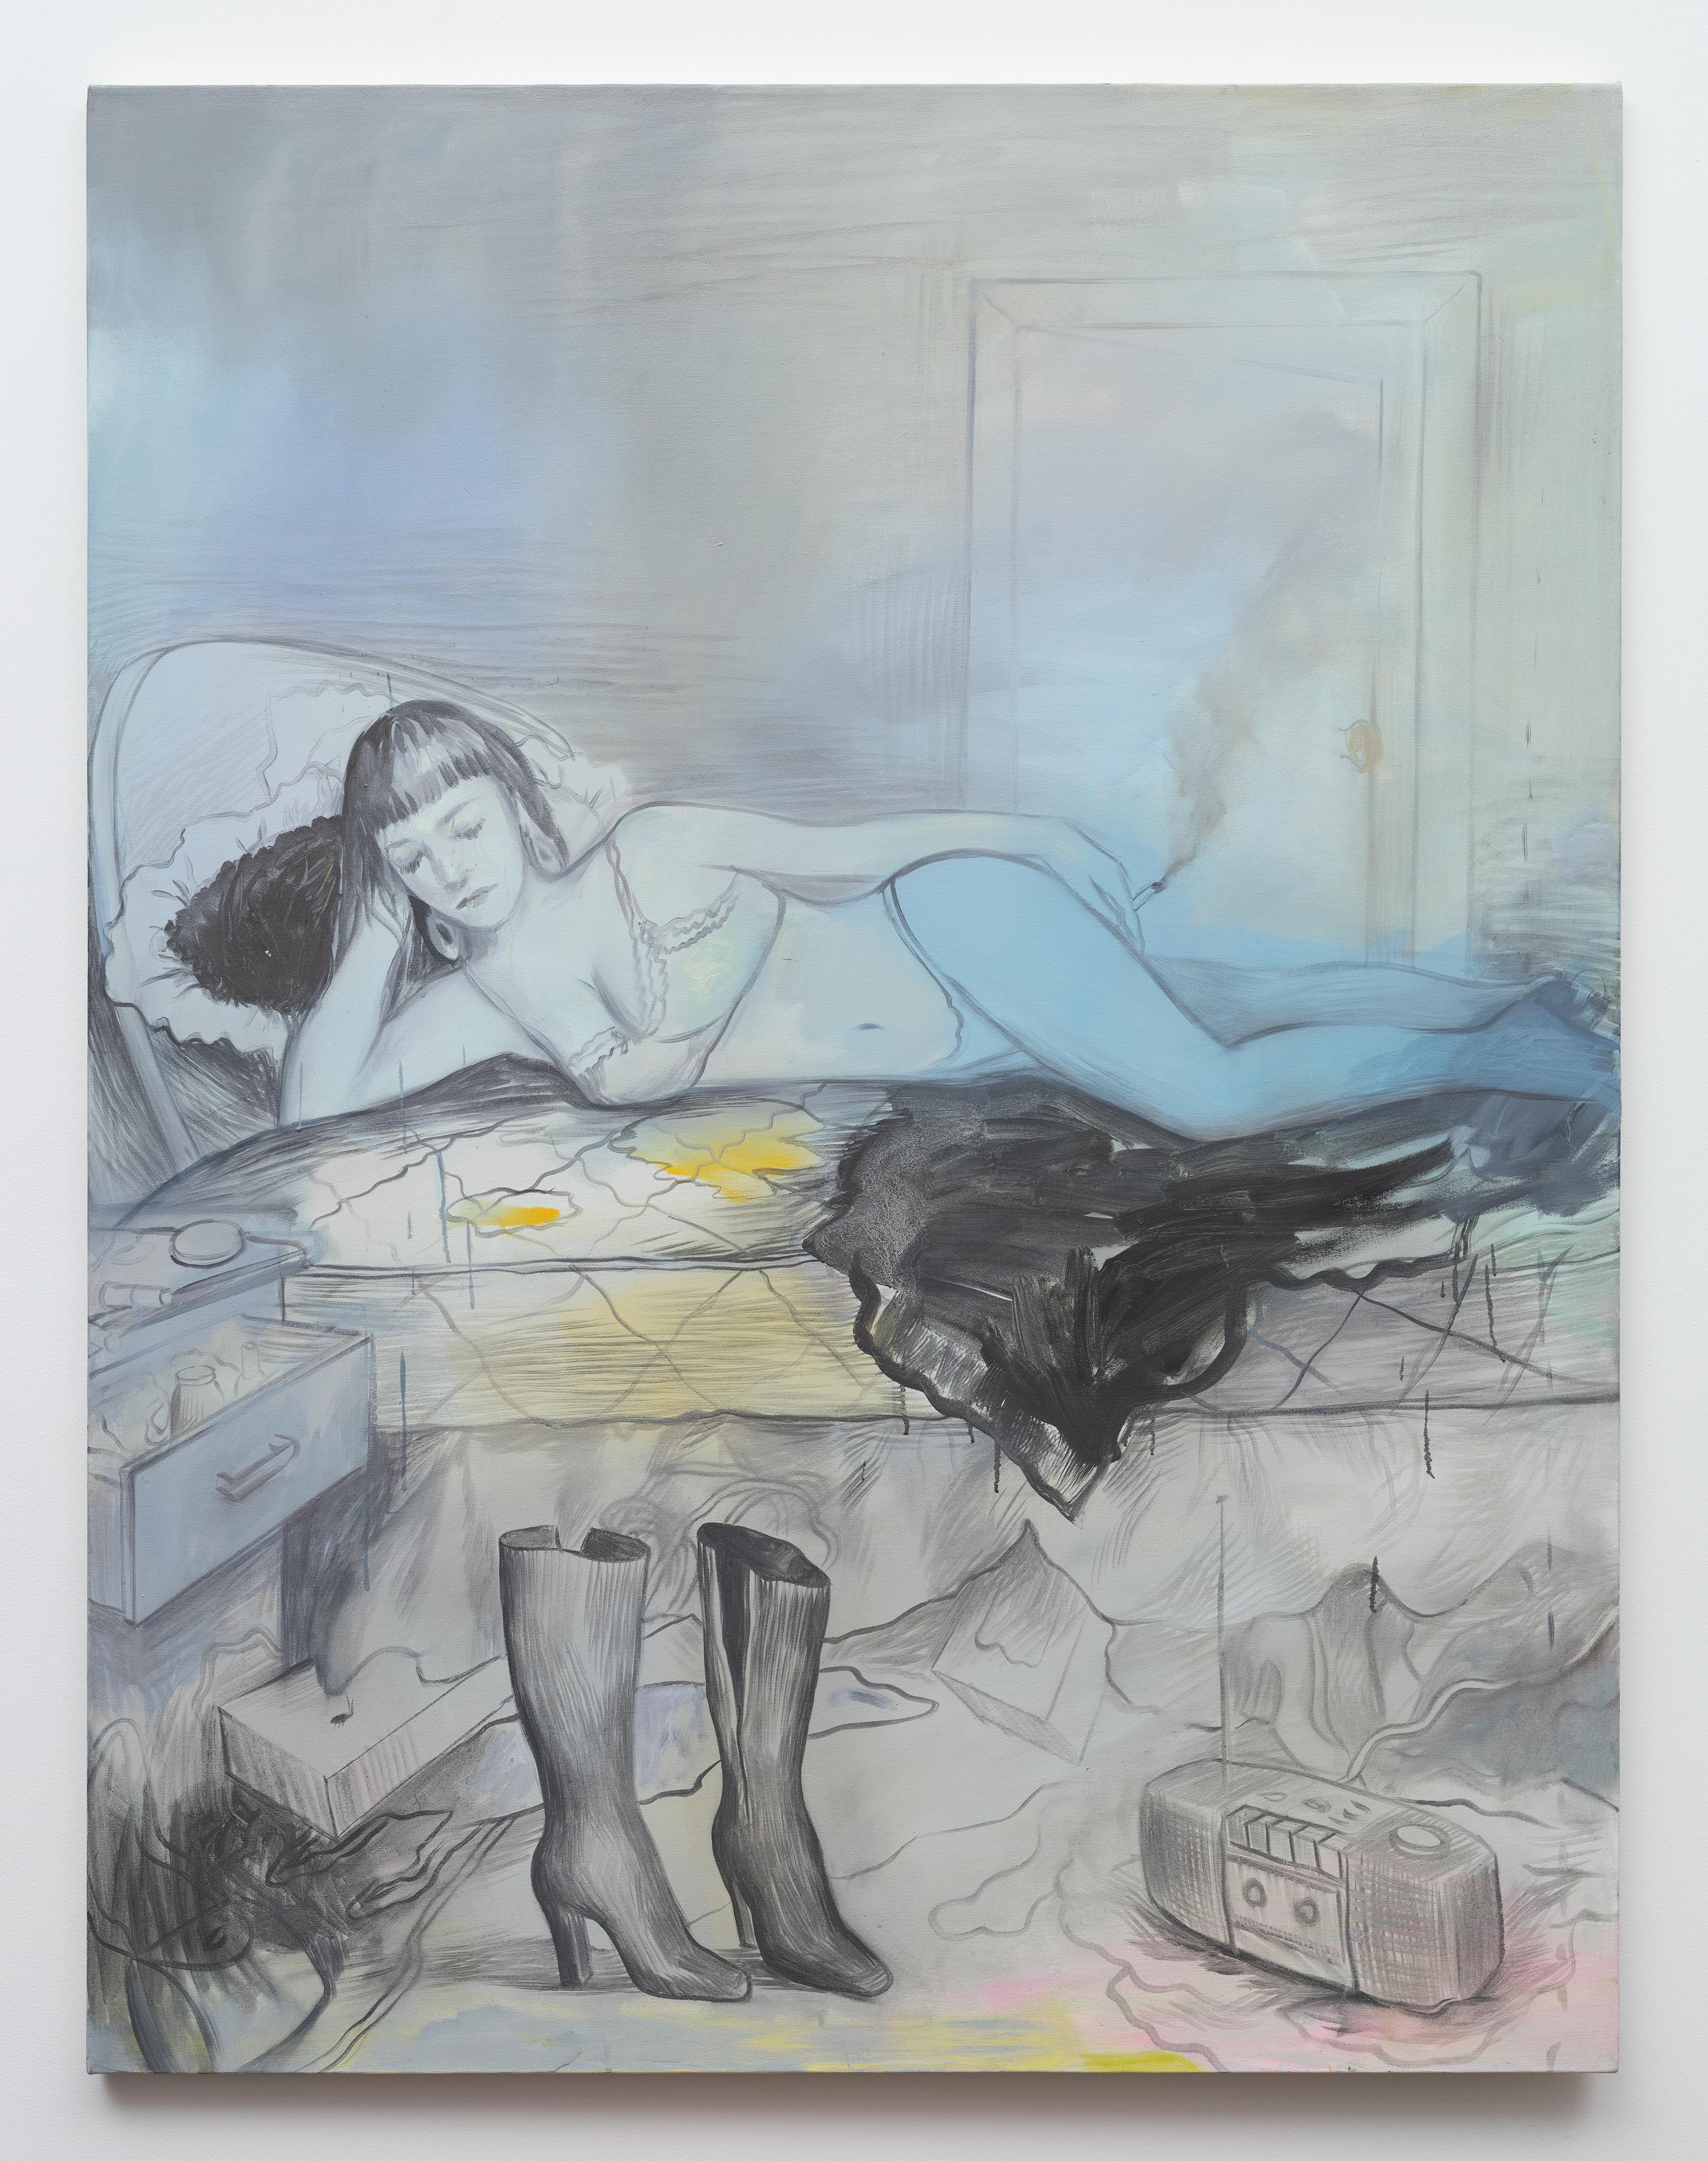 Brandi Twilley<br>Boots<br>2015<br>oil on canvas<br>62 x 48 in (157.48 x 121.92 cm)